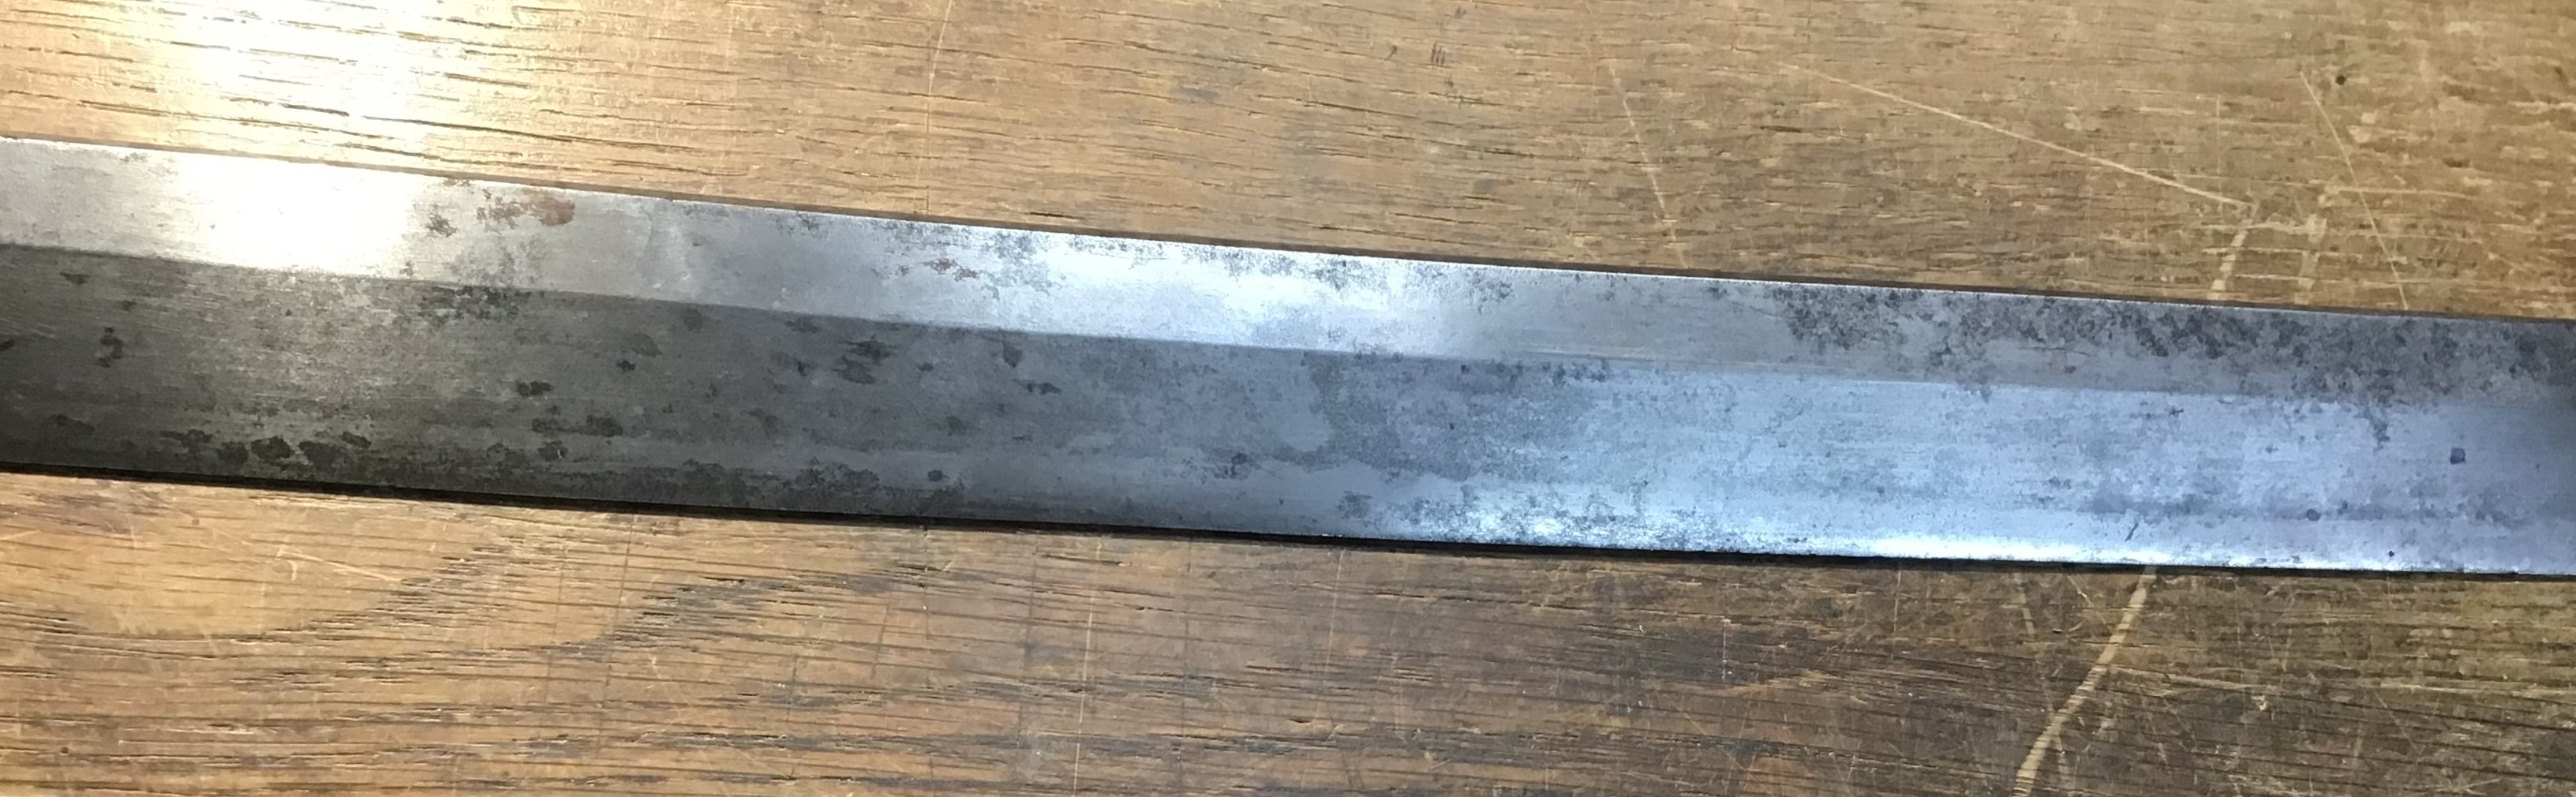 19th Century Japanese Katana Sword (blade could be older), Signature to tang, black lacquered - Image 7 of 21